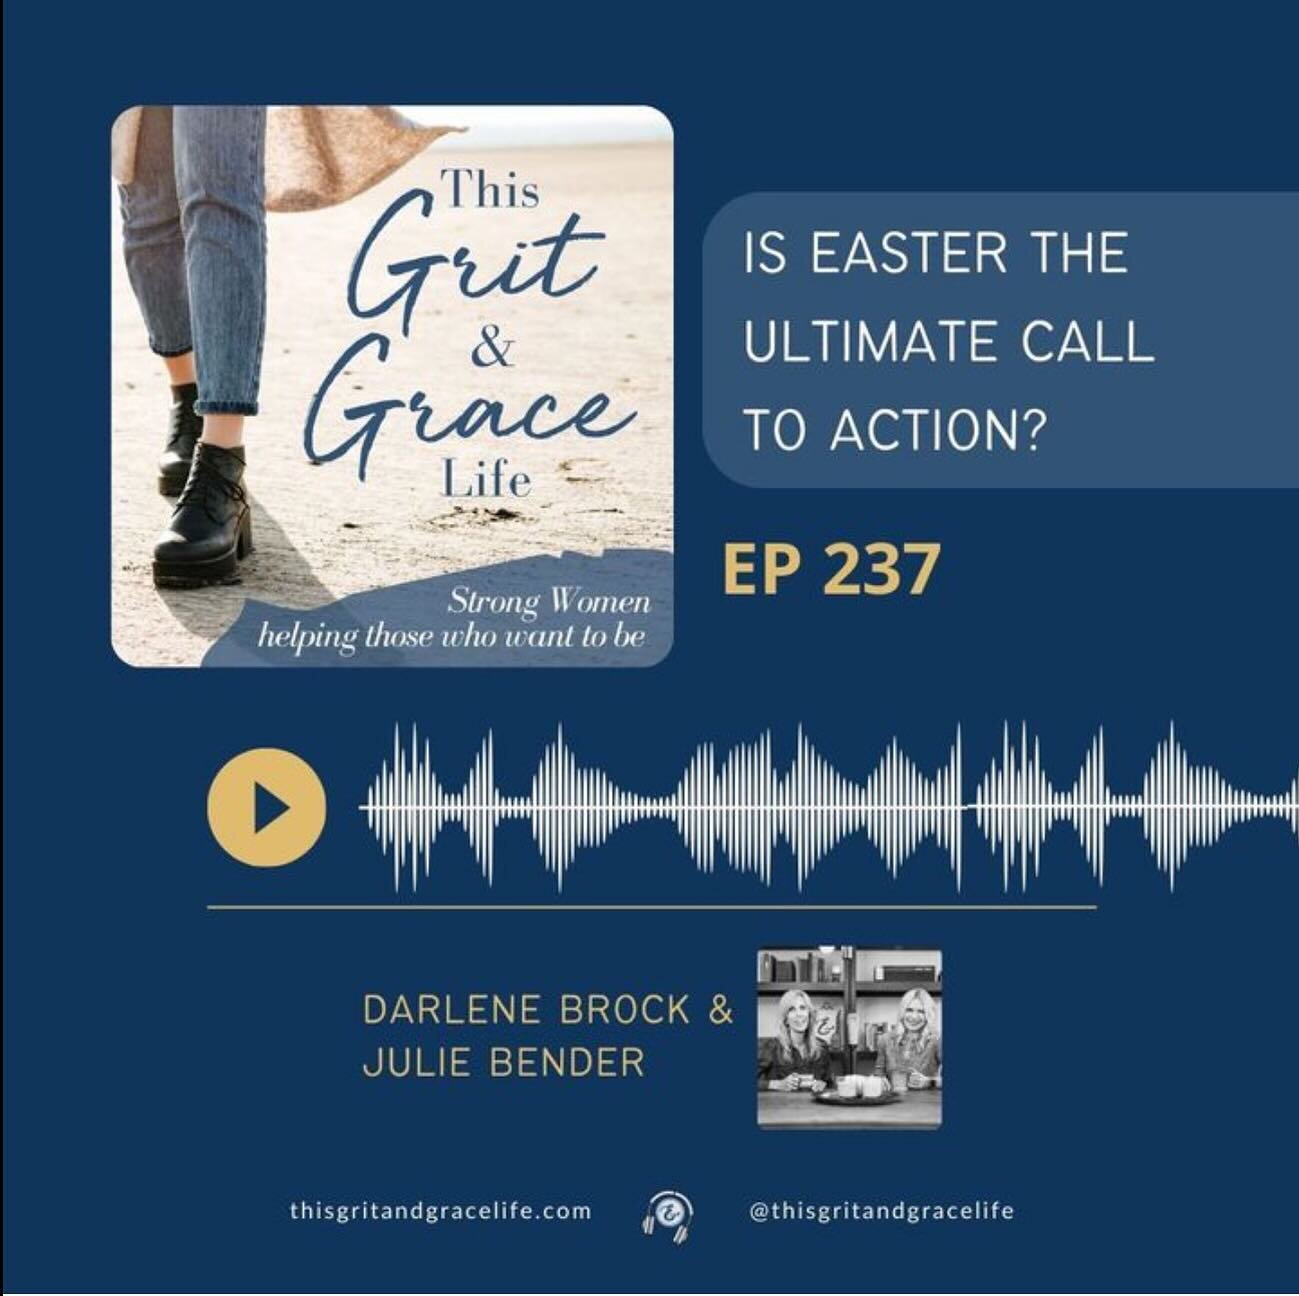 Easter isn&rsquo;t all about Peeps and Cadbury eggs, although co-host Julie Bender wouldn&rsquo;t mind one or two! But is Easter the ultimate call to action?

In this heartfelt podcast episode, Julie and Darlene Brock discuss the significance of East